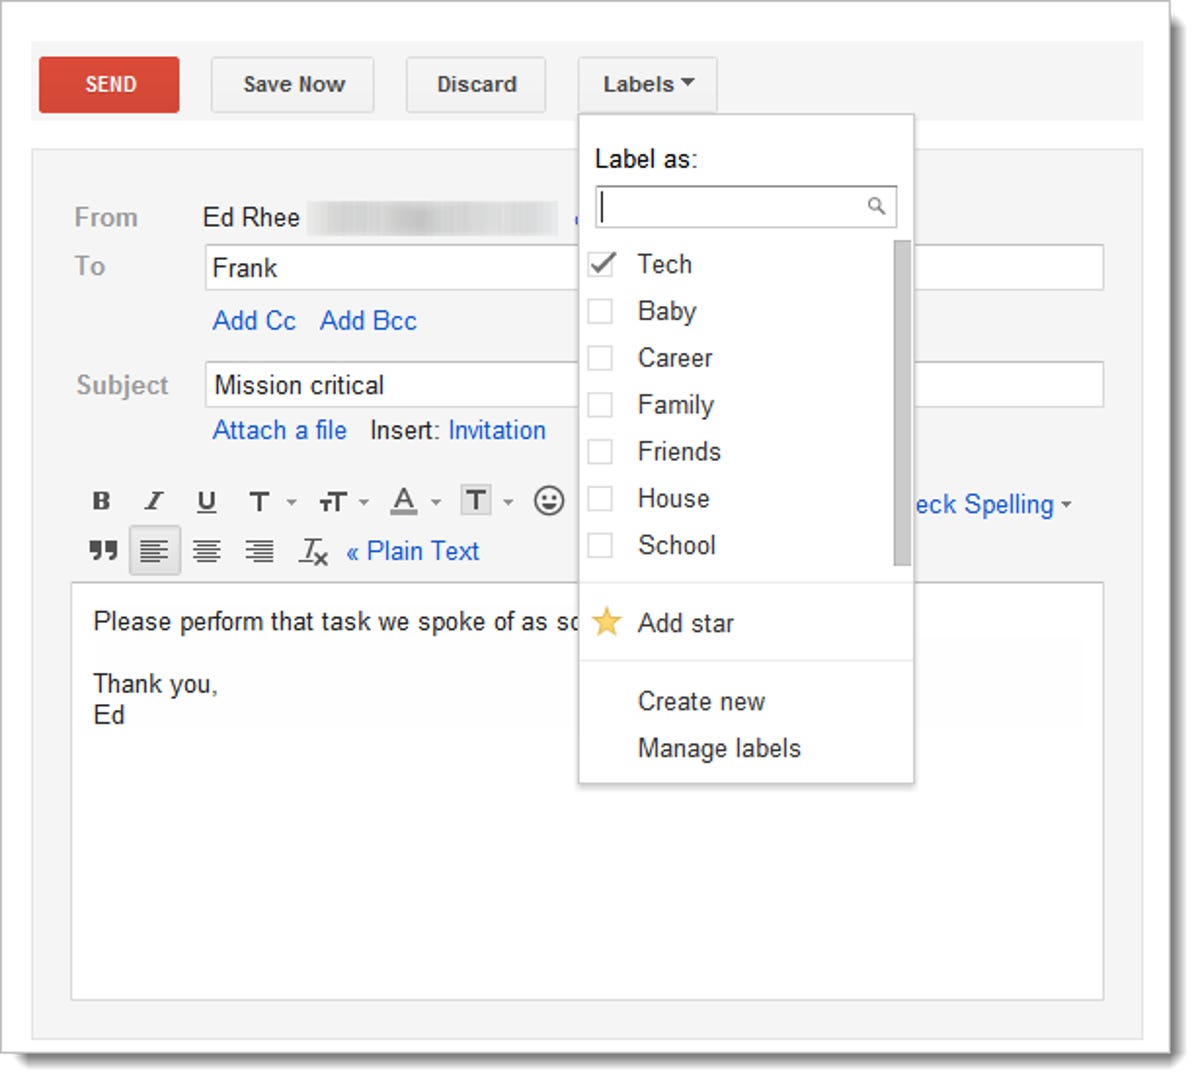 Pre-label or star Gmail messages